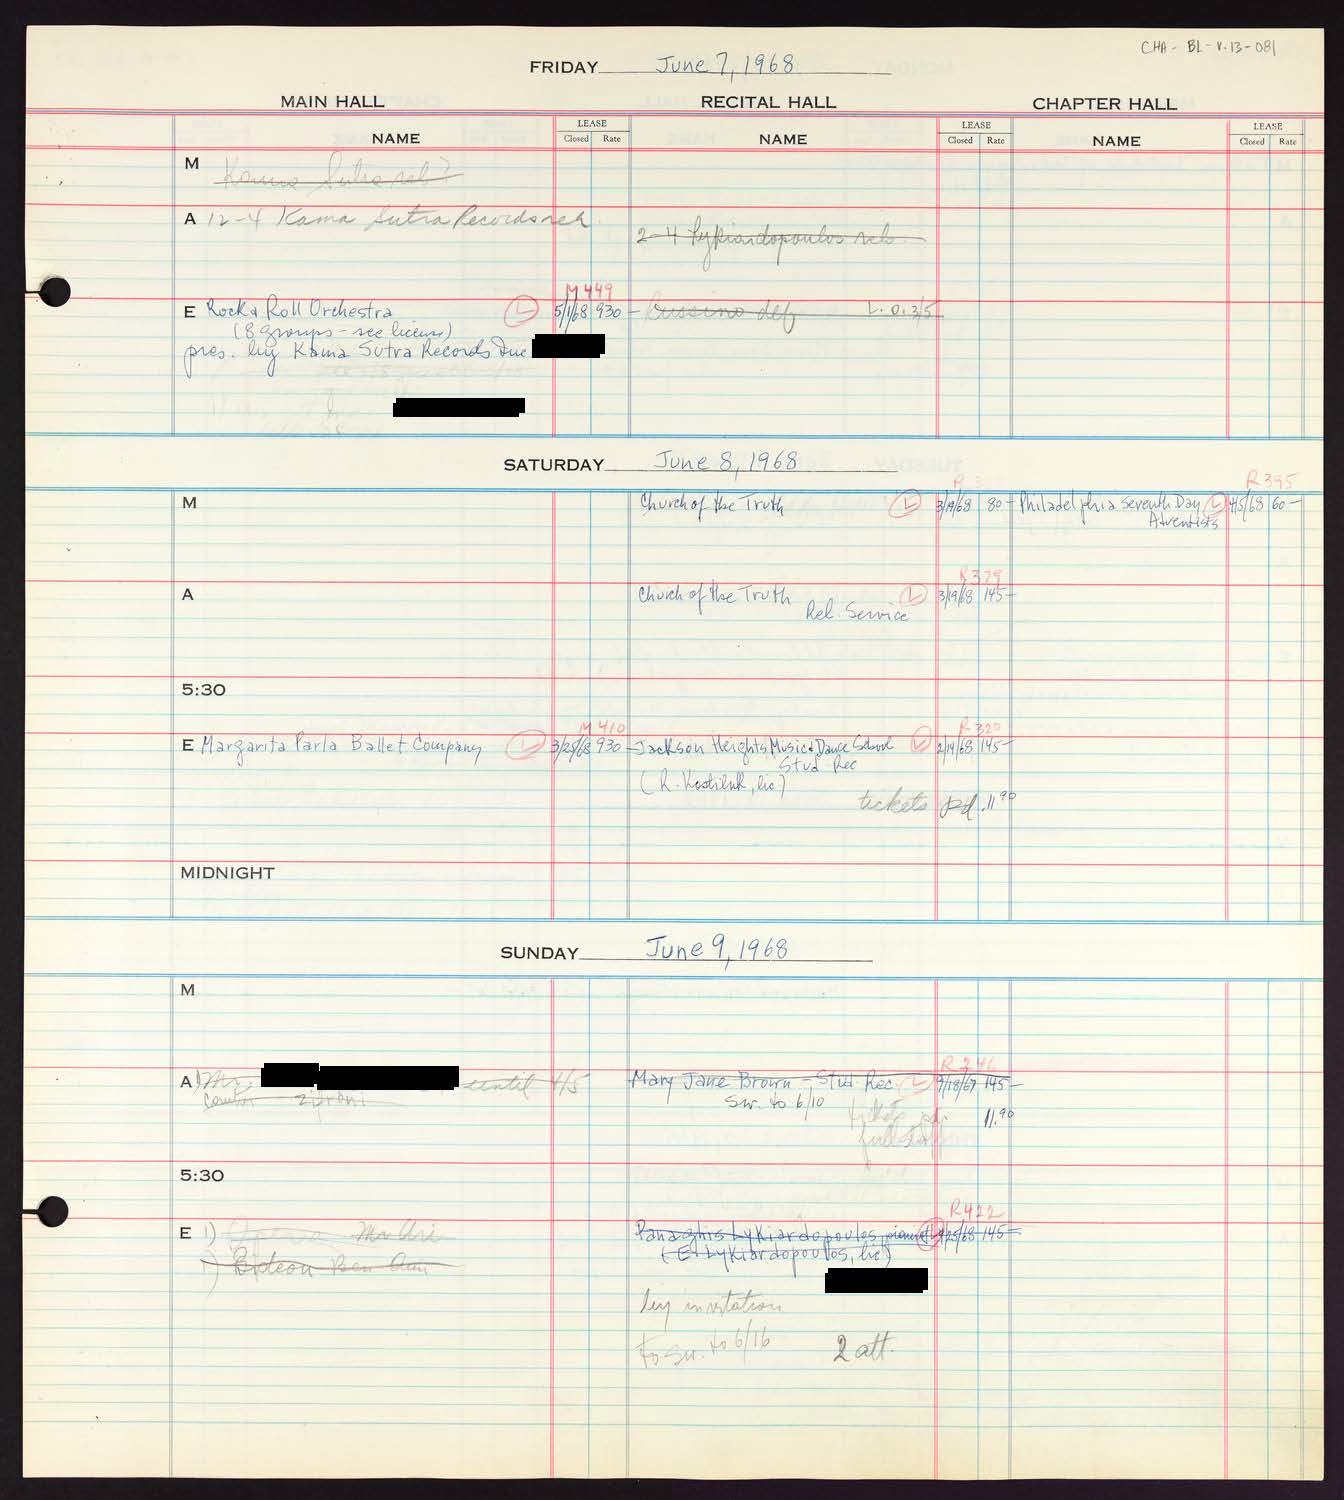 Carnegie Hall Booking Ledger, volume 13, page 81